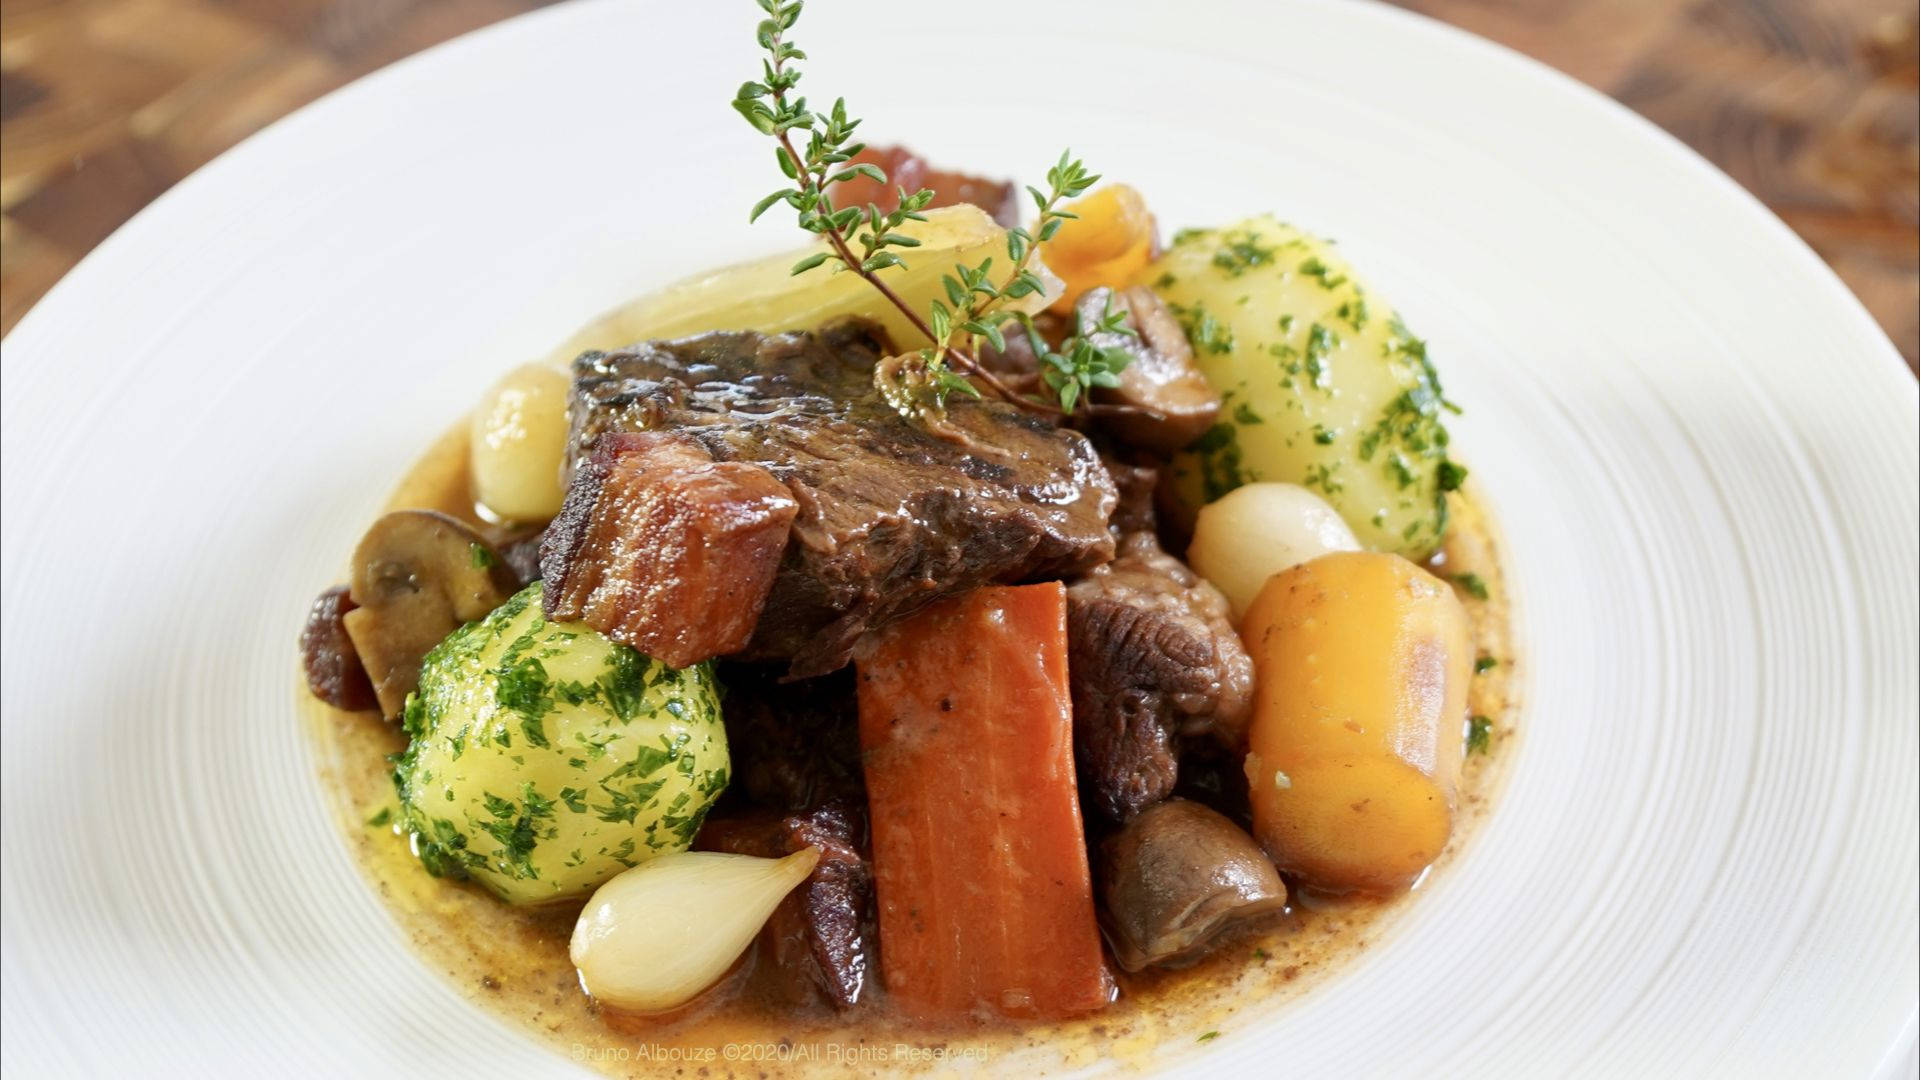 A sumptuous serving of Beef Bourguignon garnished beautifully. Wallpaper